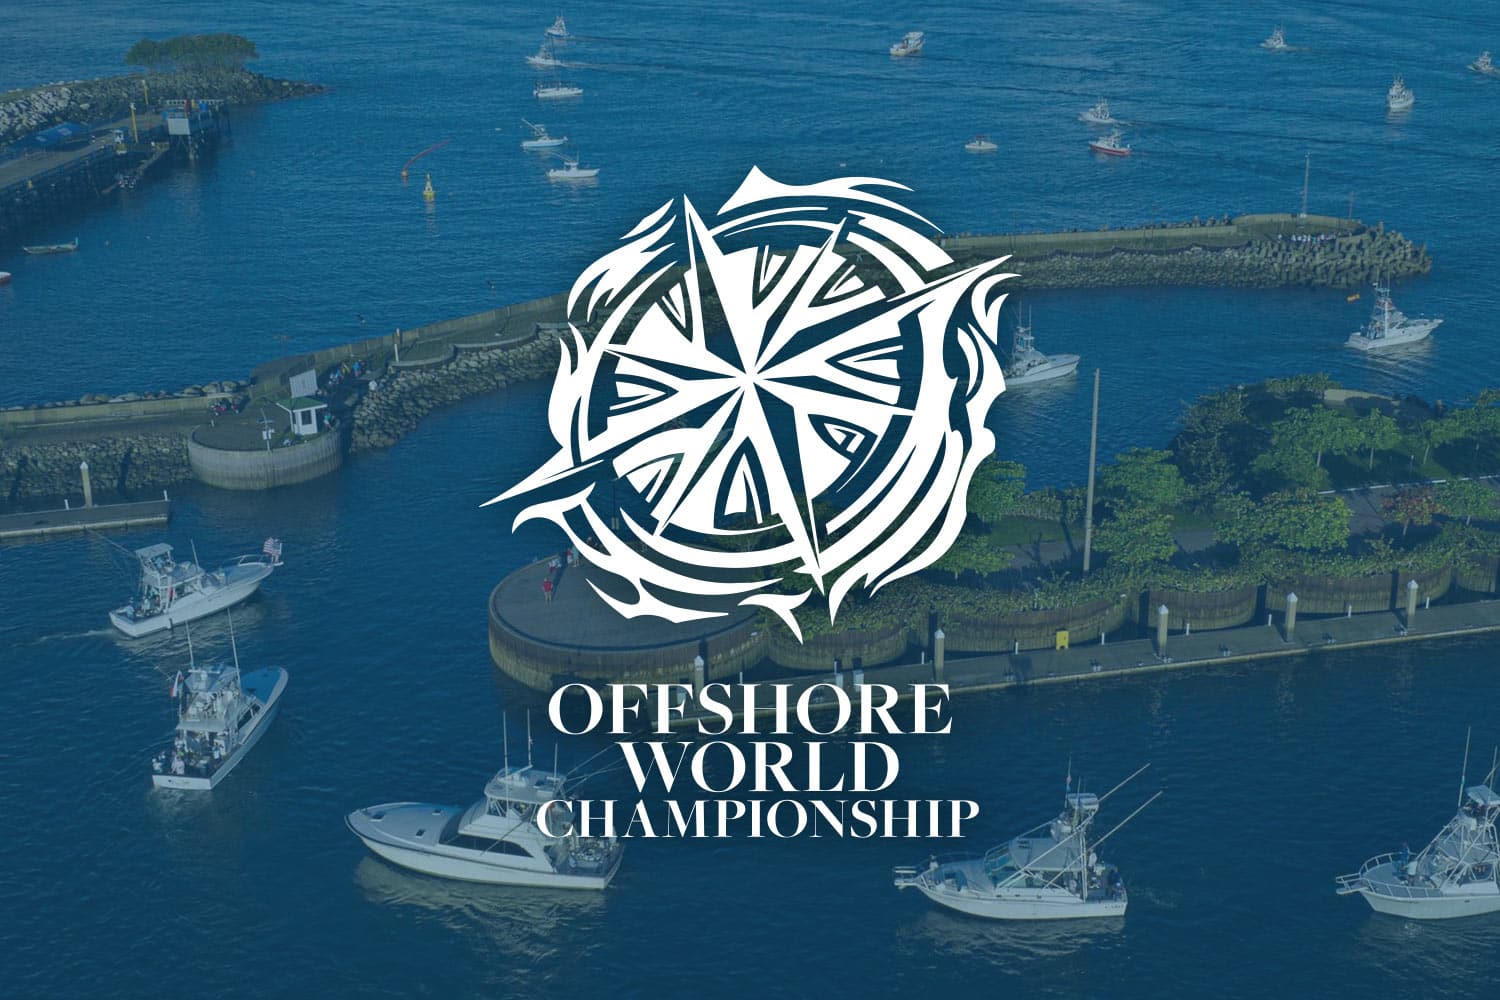 Offshore World Championship logo in white overlaid a blue-filter of the fleet leaving out for a day of fishing.